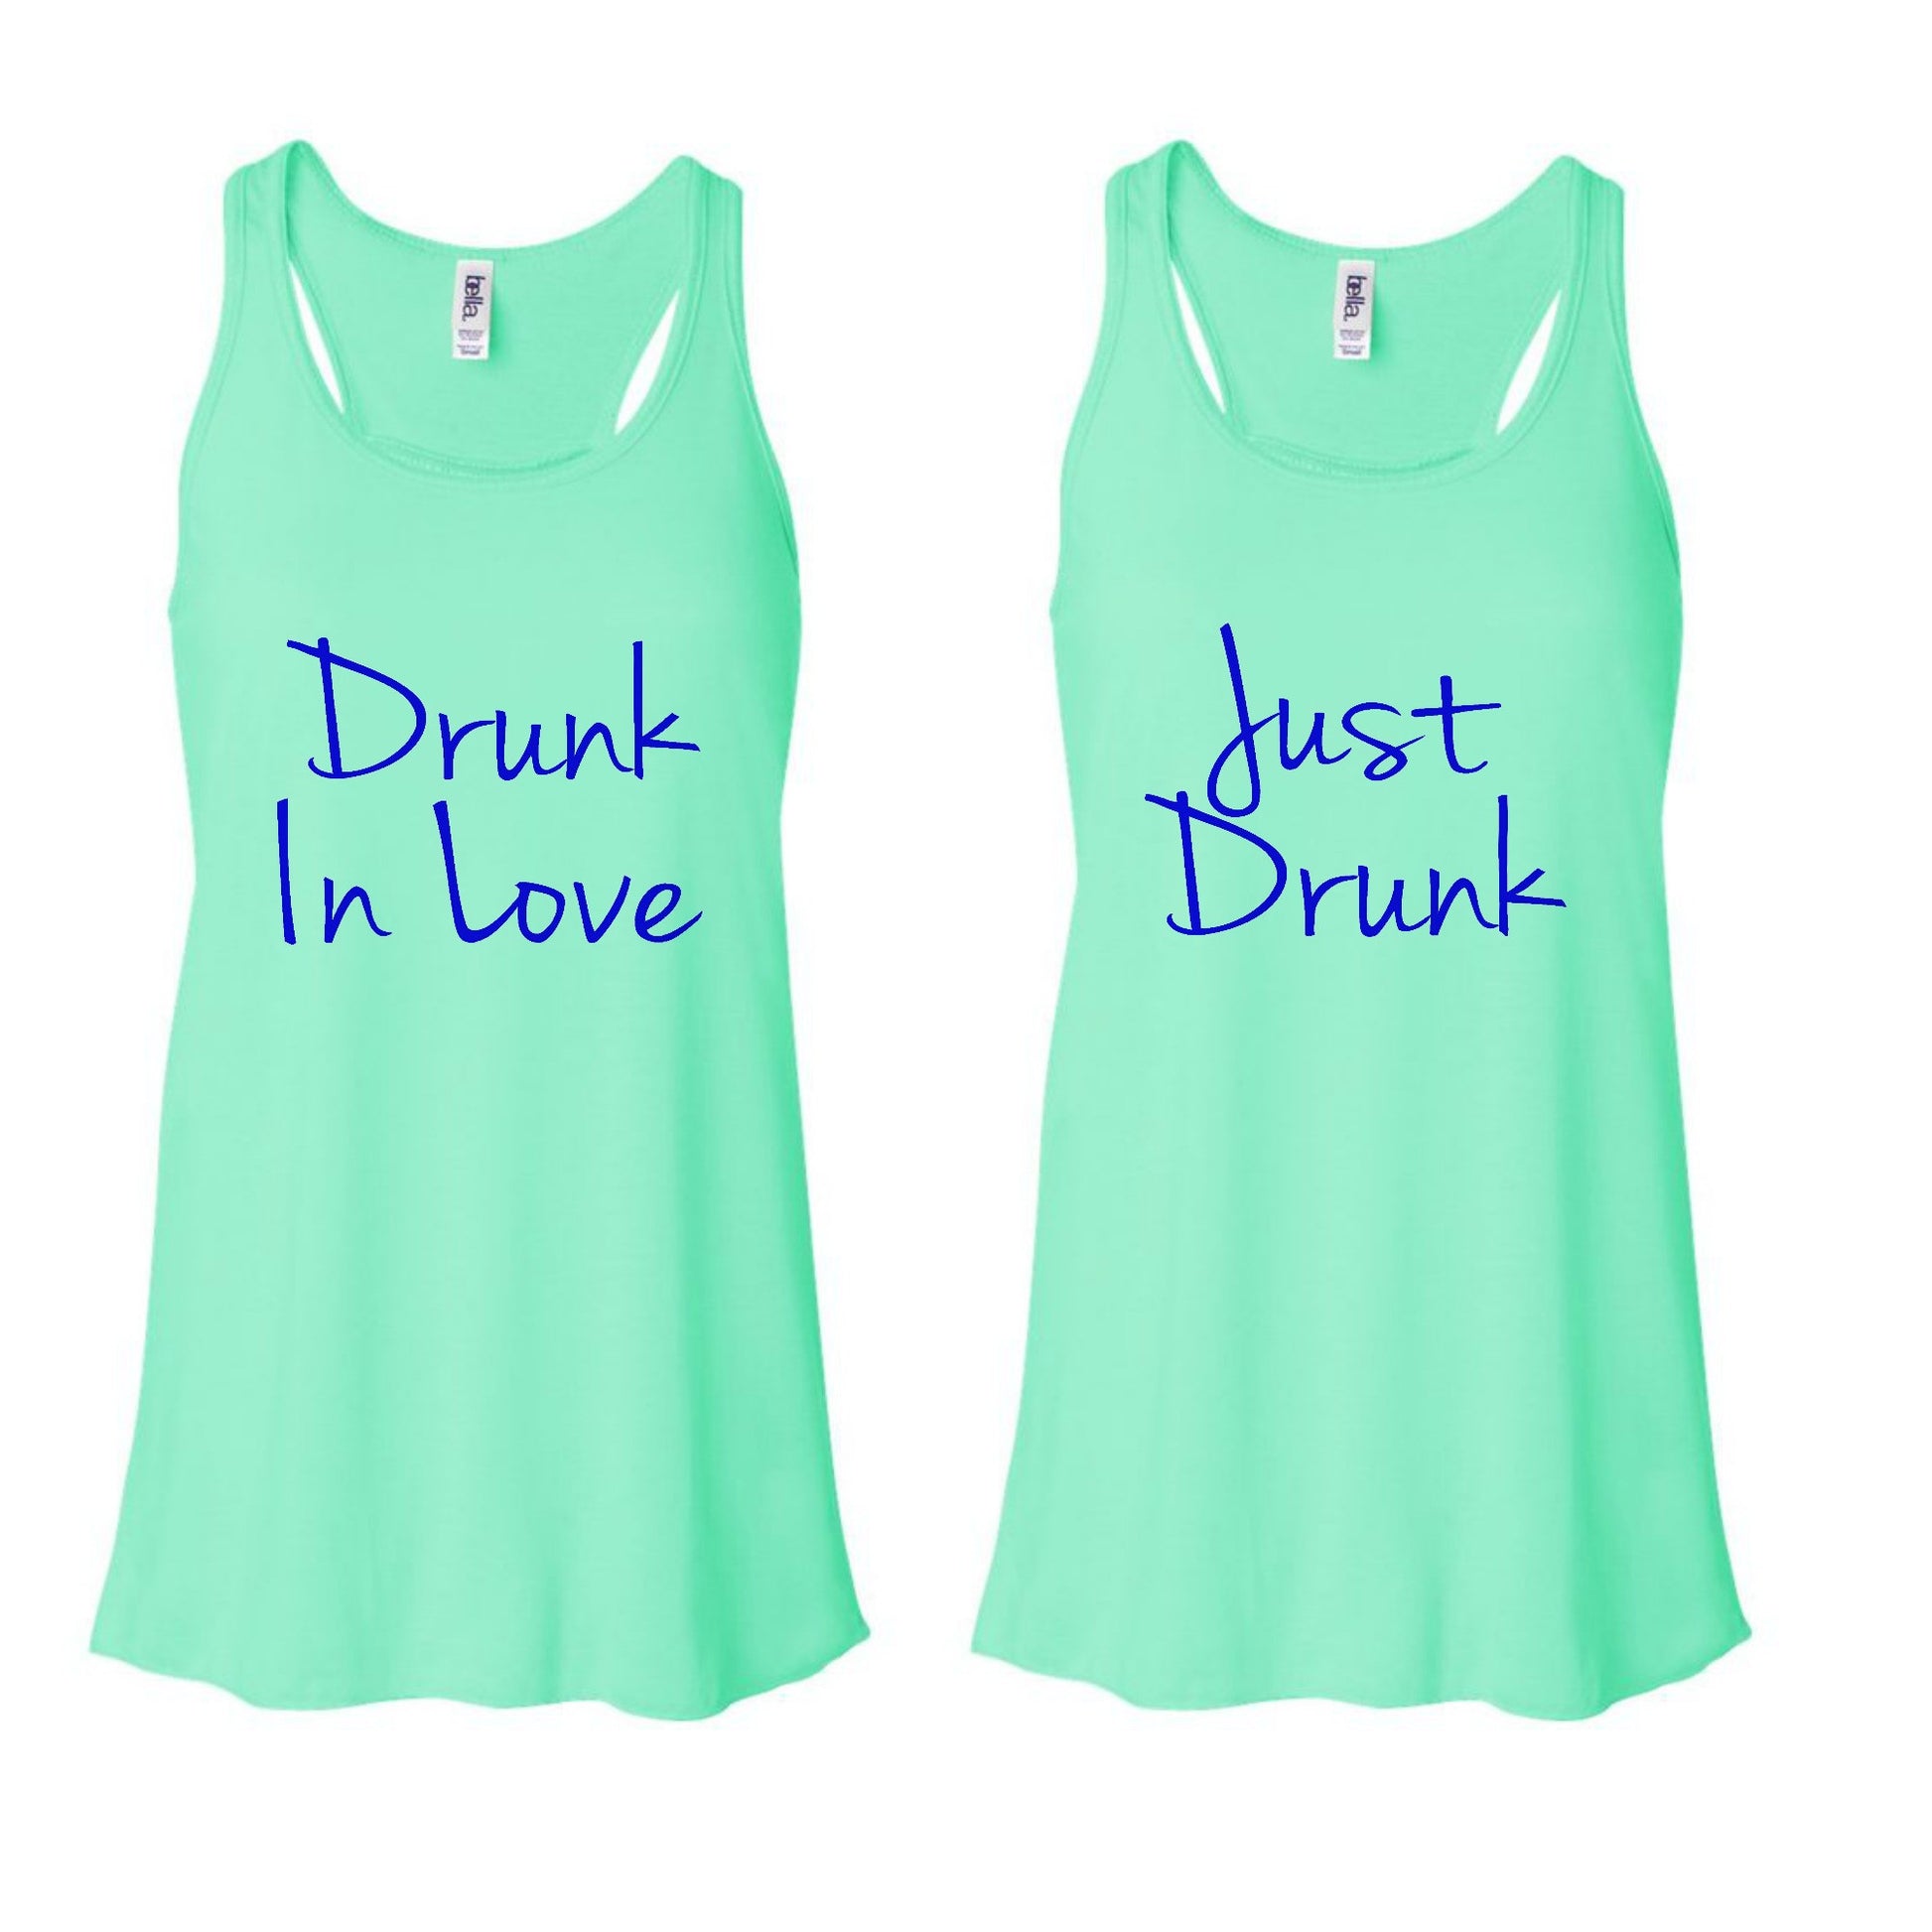 DRUNK IN LOVE/JUST DRUNK Bachelorette party Flowy Tanks - Be Vocal Designs